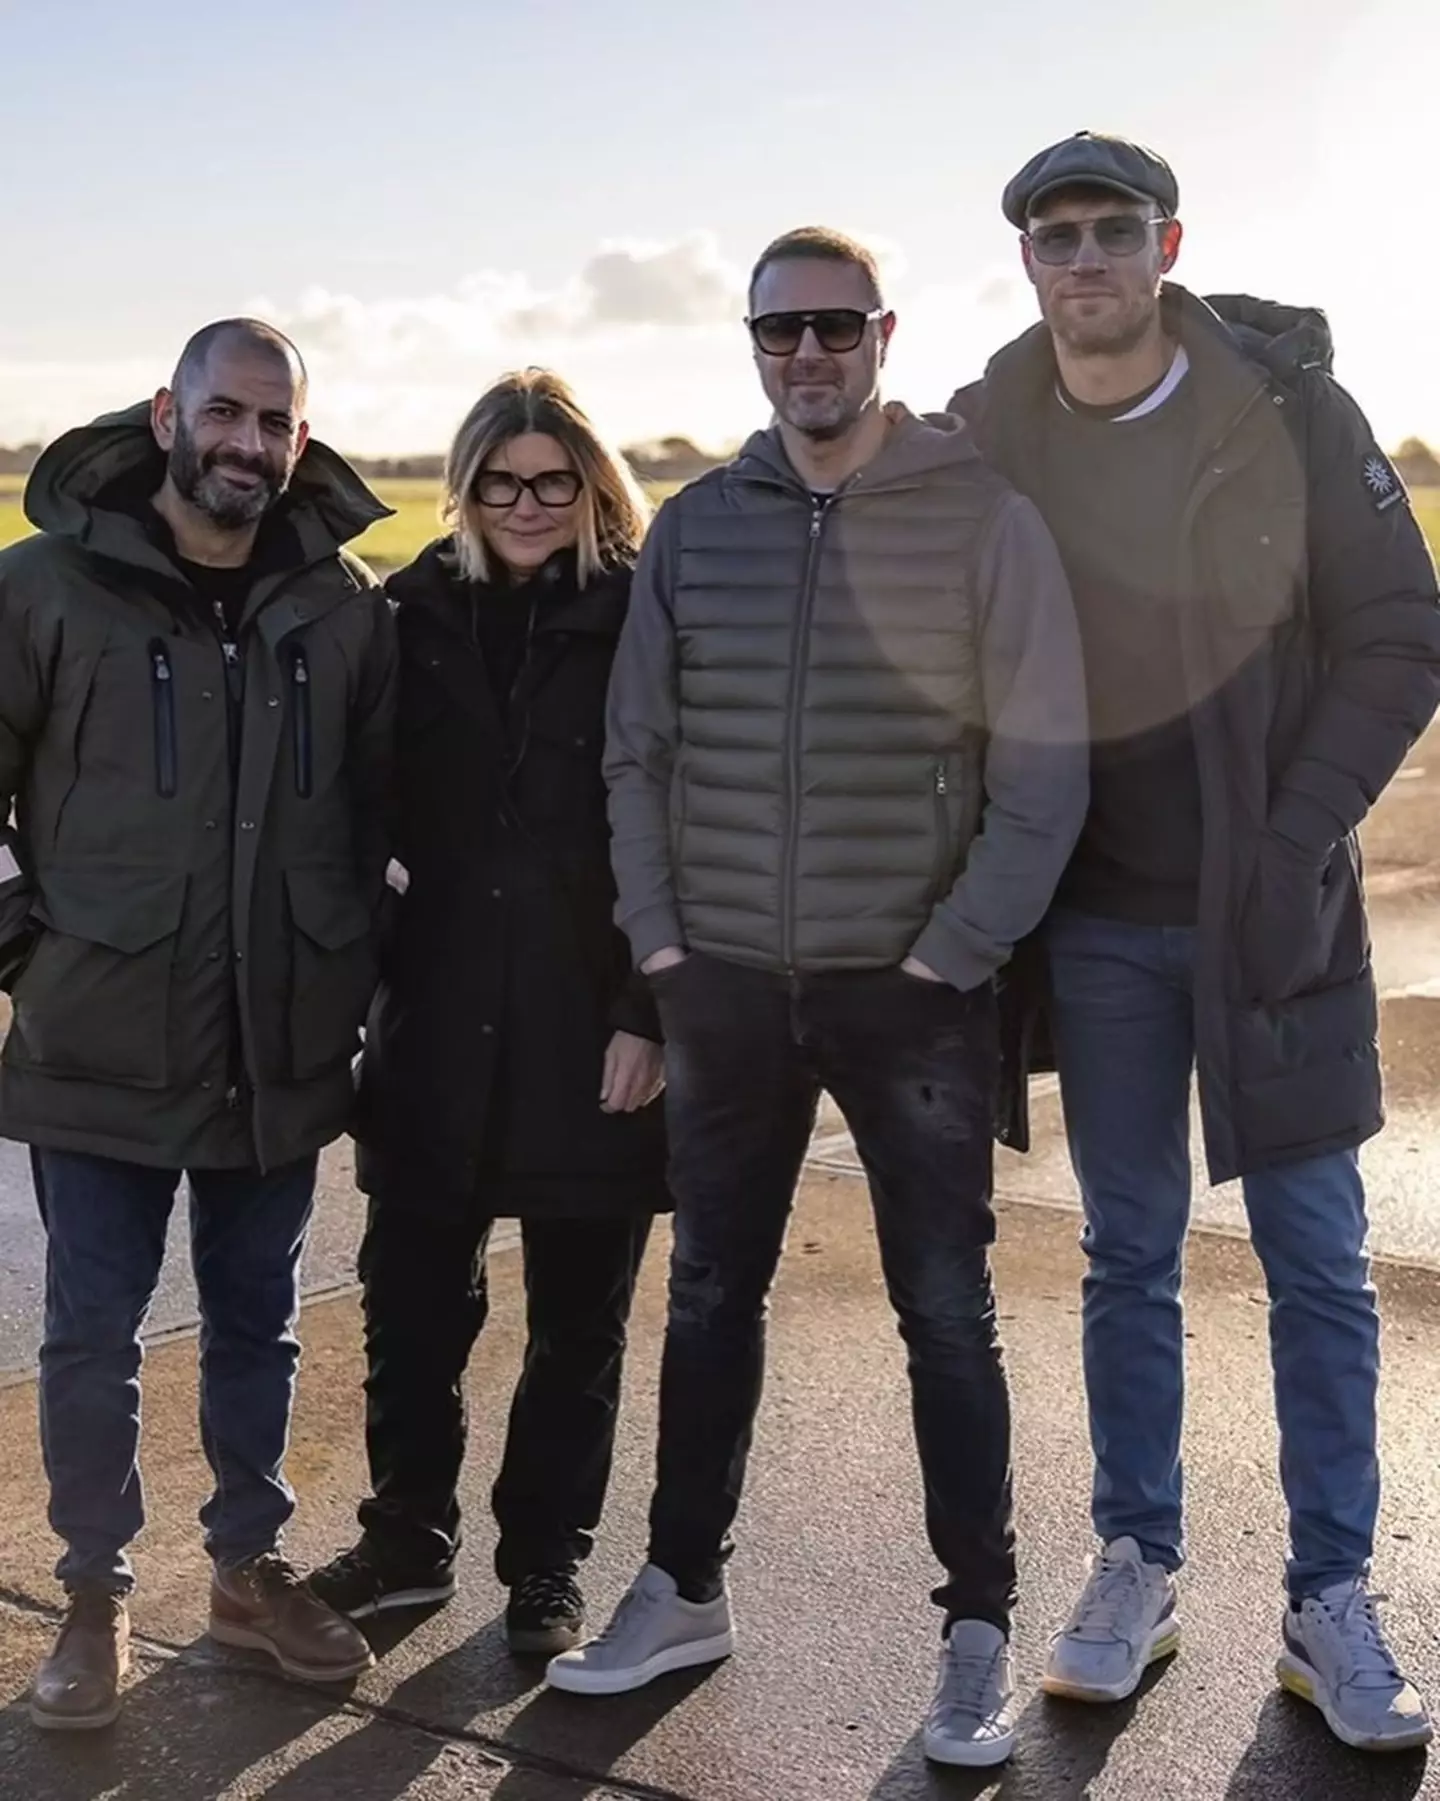 Clare Pizey, pictured with Chris Harris, Paddy McGuinness and Freddie Flintoff, spent seven years working on Top Gear.